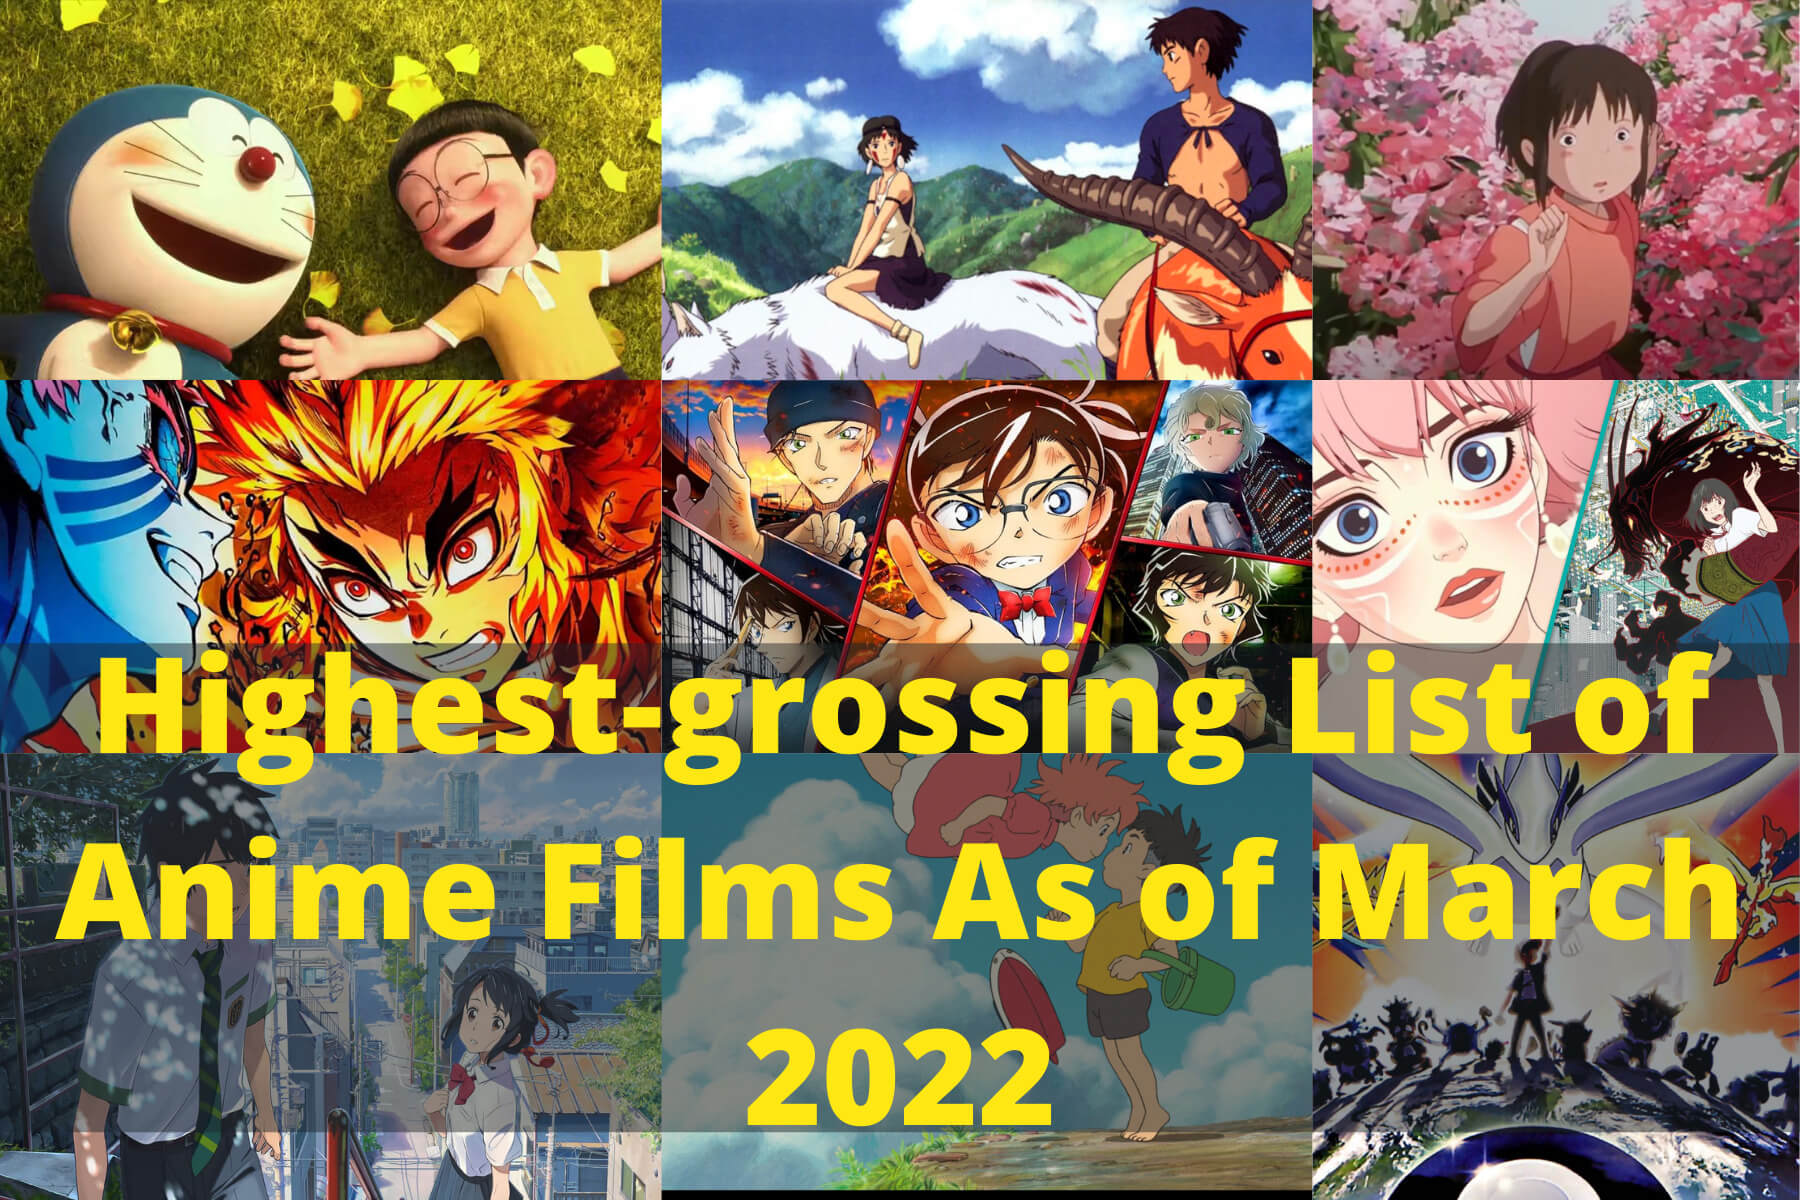 Which anime/manga franchise has made the most money? - Quora